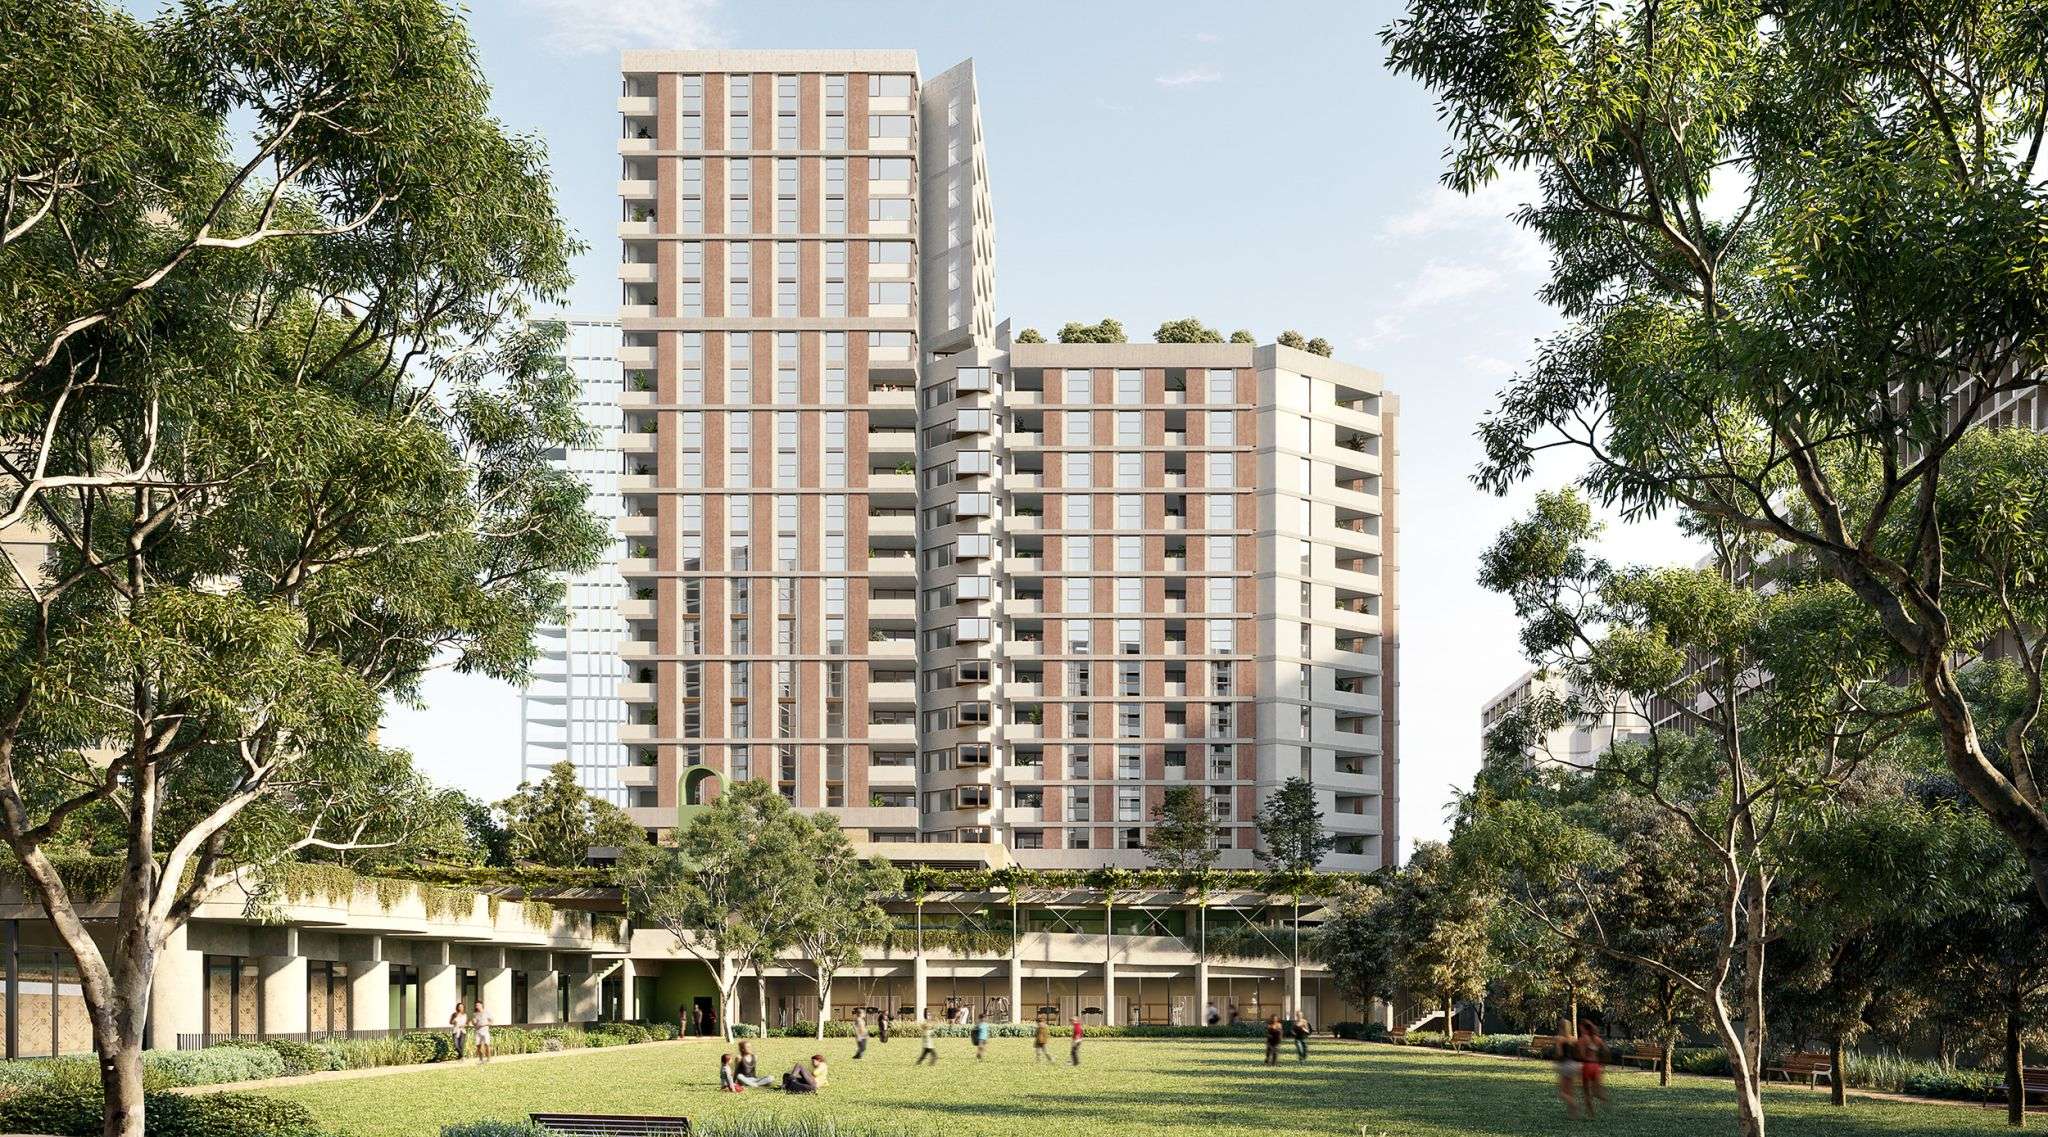 Approval for Stage 2 of Midtown at Macquarie Park